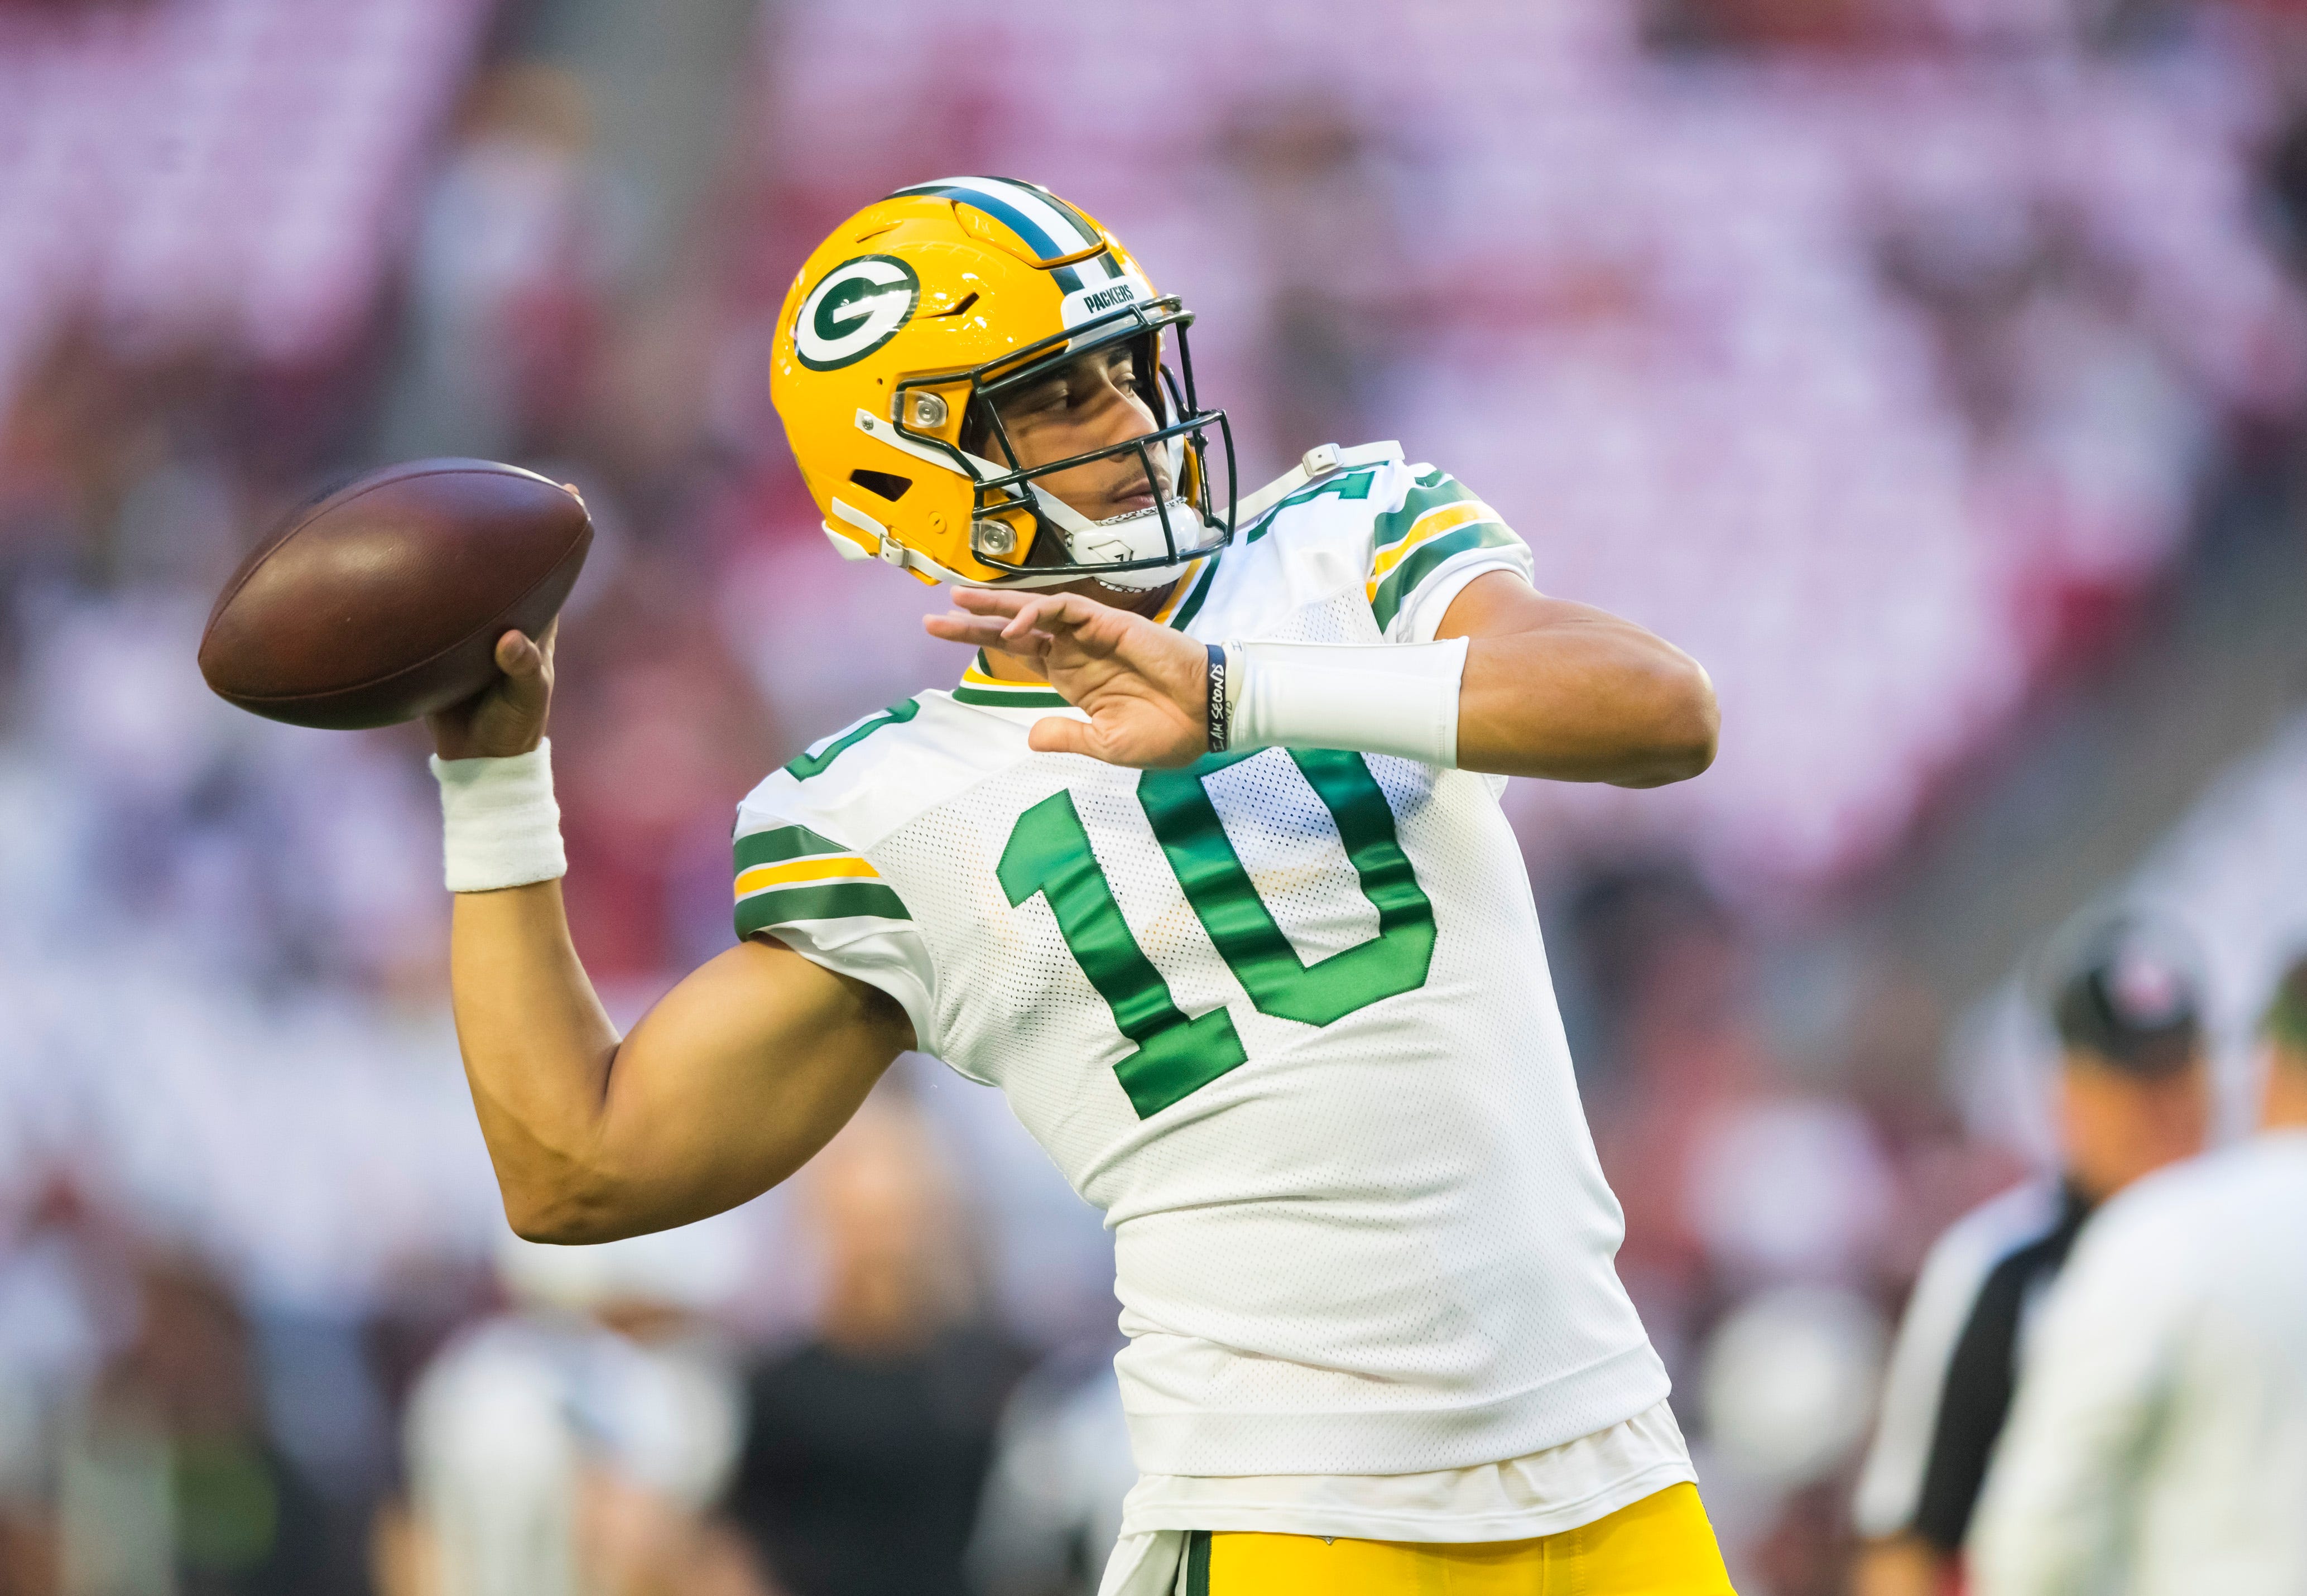 Jordan Love: Four things to know about Packers QB ahead of Chiefs game